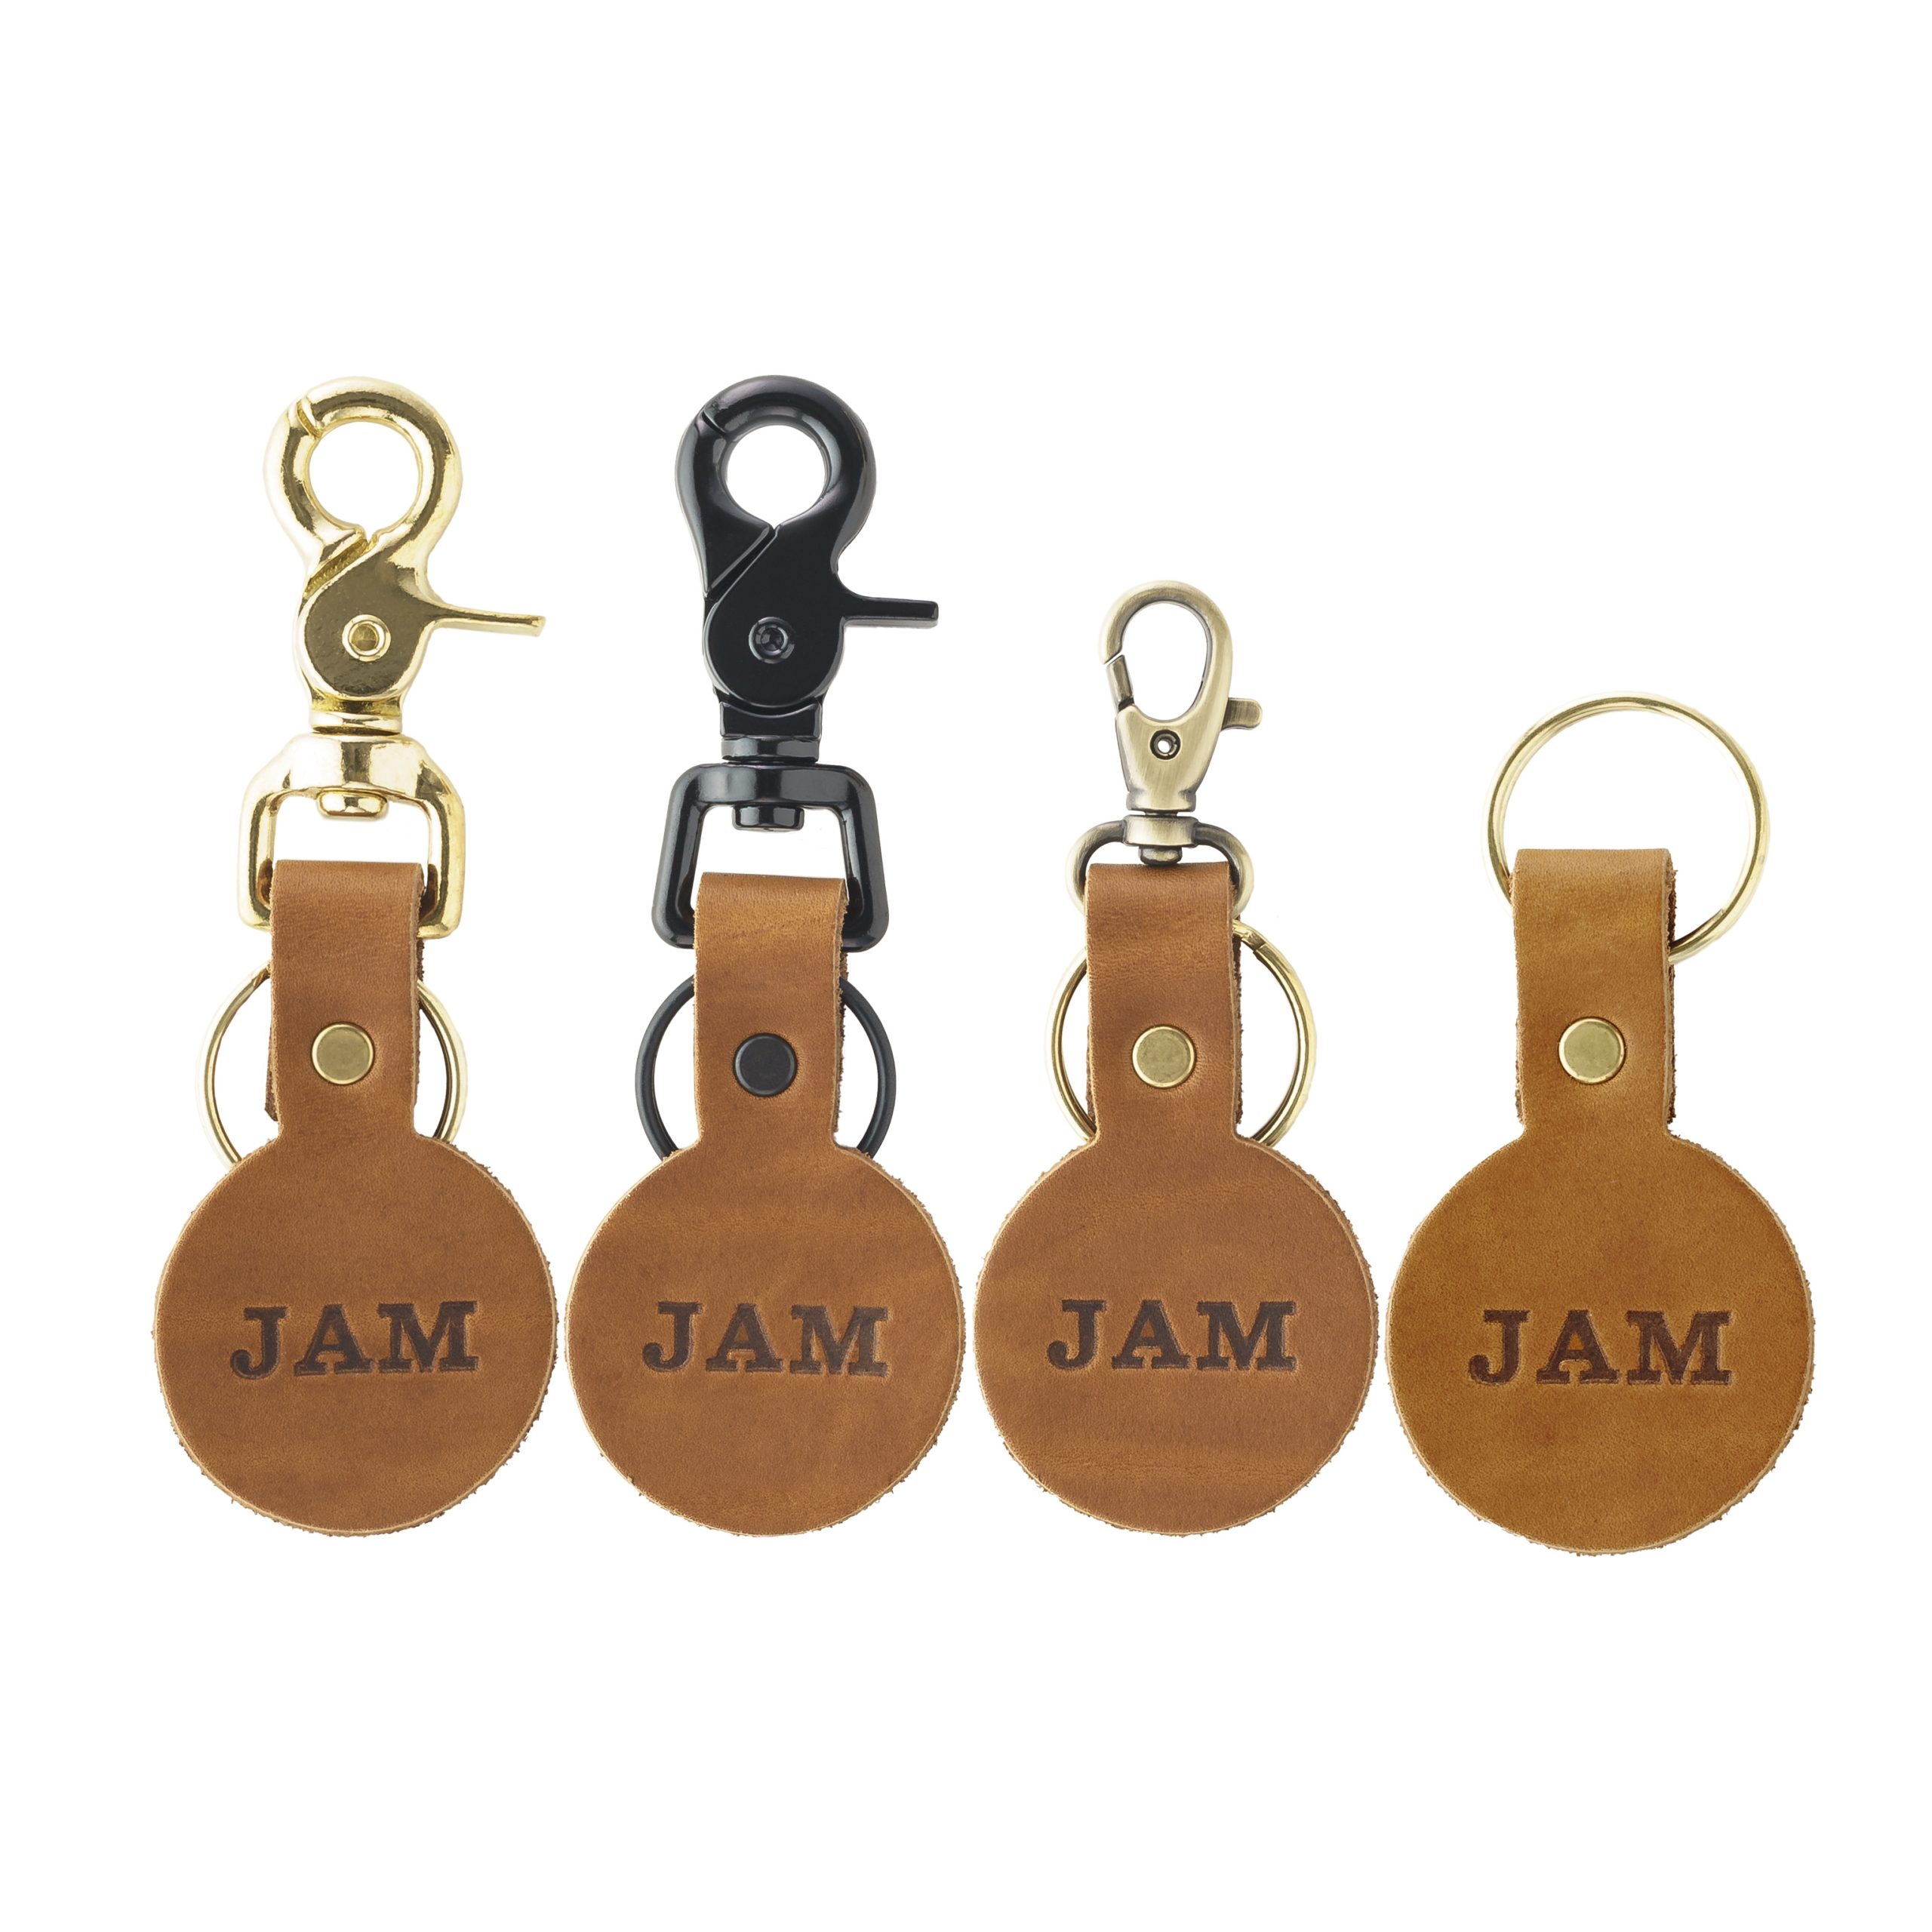 https://www.ooweeproducts.com/wp-content/uploads/2019/04/ROUND-KEYCHAIN-QUAD-1-scaled.jpg